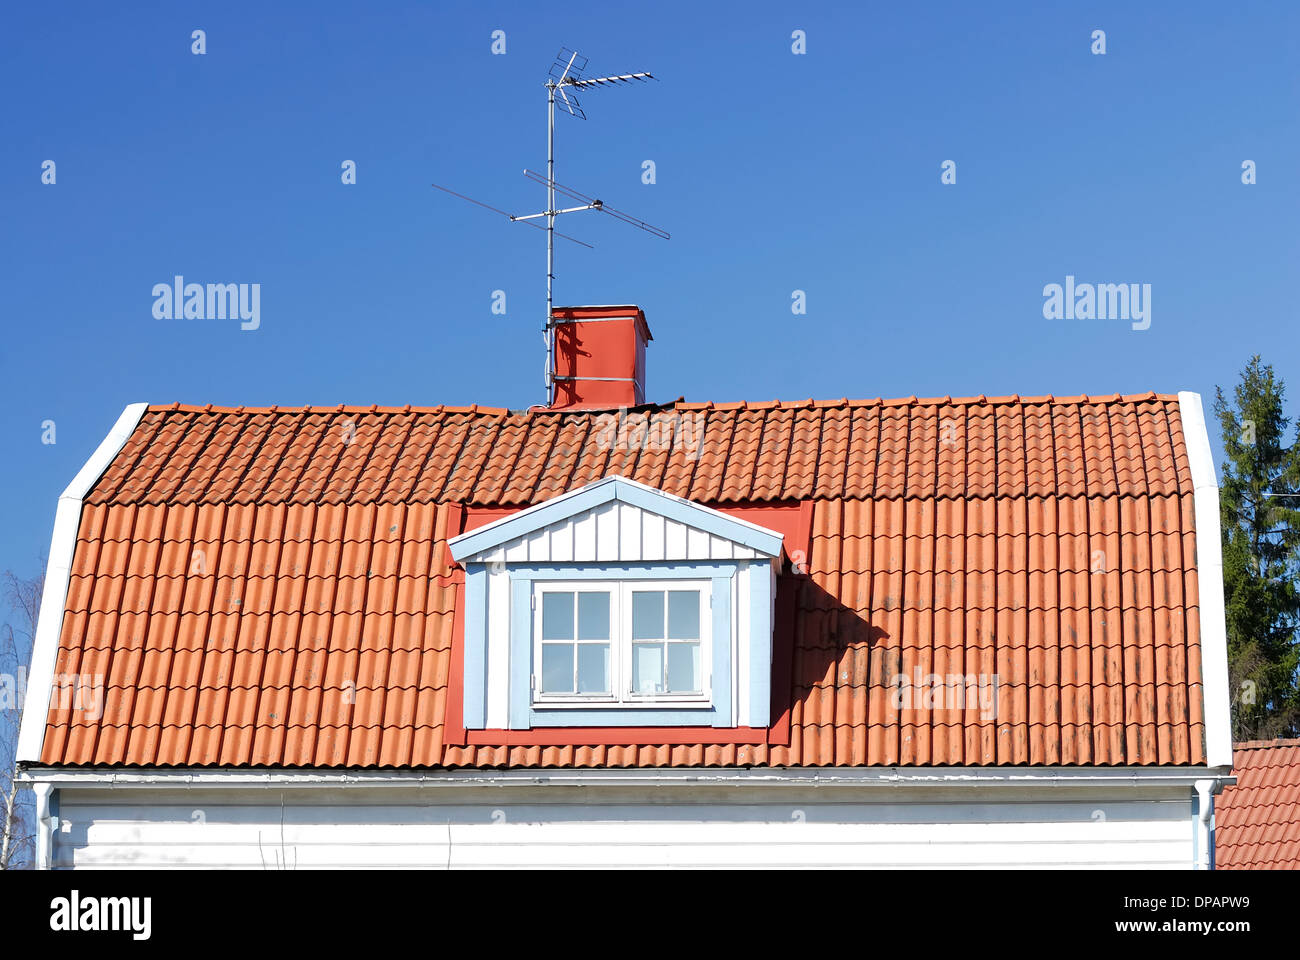 House with red roof. Stock Photo